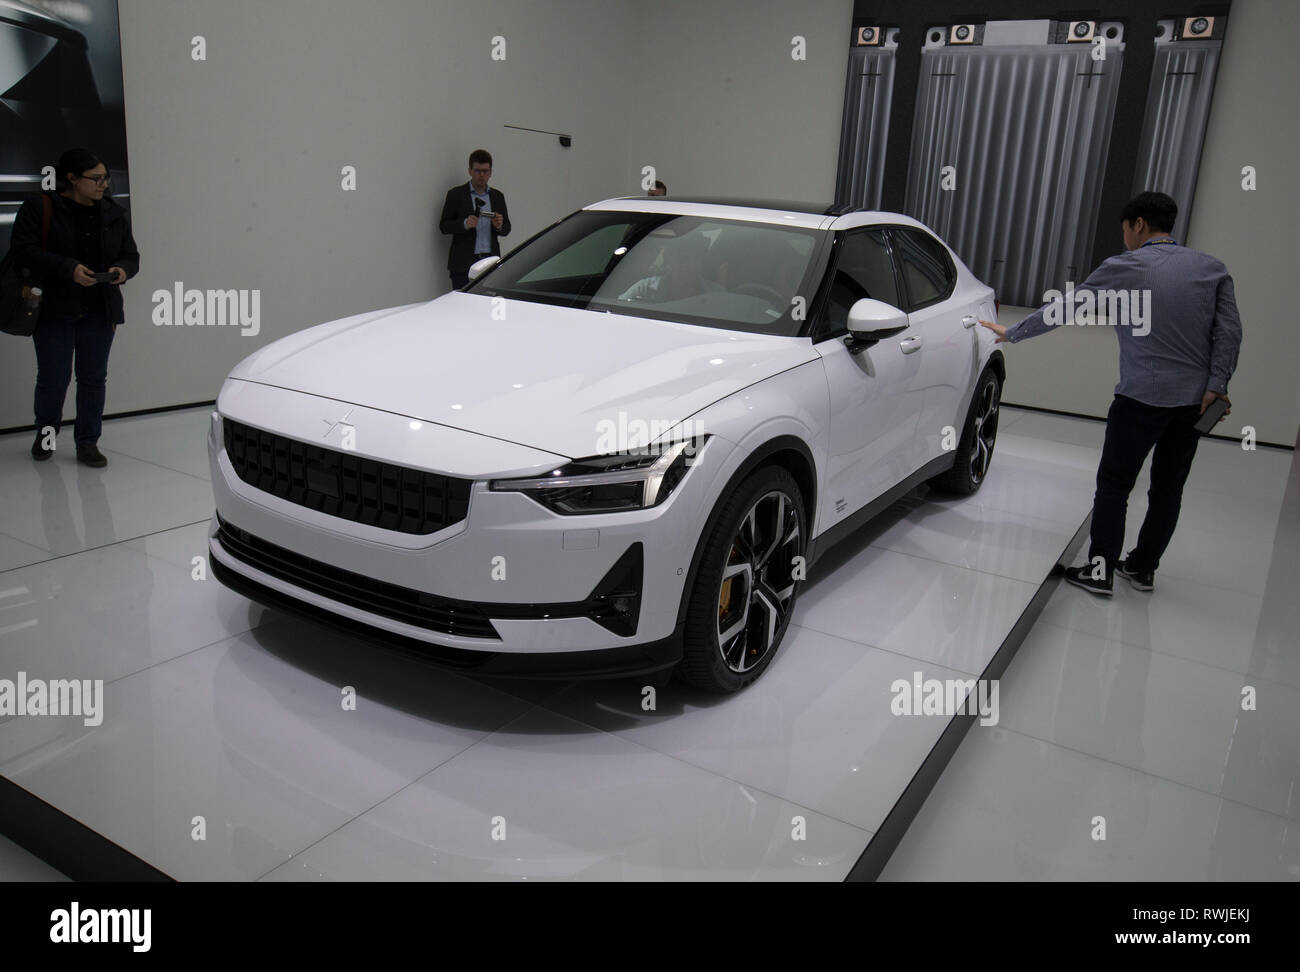 Geneva. 6th Mar, 2019. Photo taken on March 6, 2019 shows the all-electric Polestar 2 at the 89th Geneva International Motor Show in Geneva, Switzerland. Electric cars and hybrid cars are highlights at this year's Geneva International Motor Show, which will open to the public from March 7 to 17. Credit: Xu Jinquan/Xinhua/Alamy Live News Stock Photo